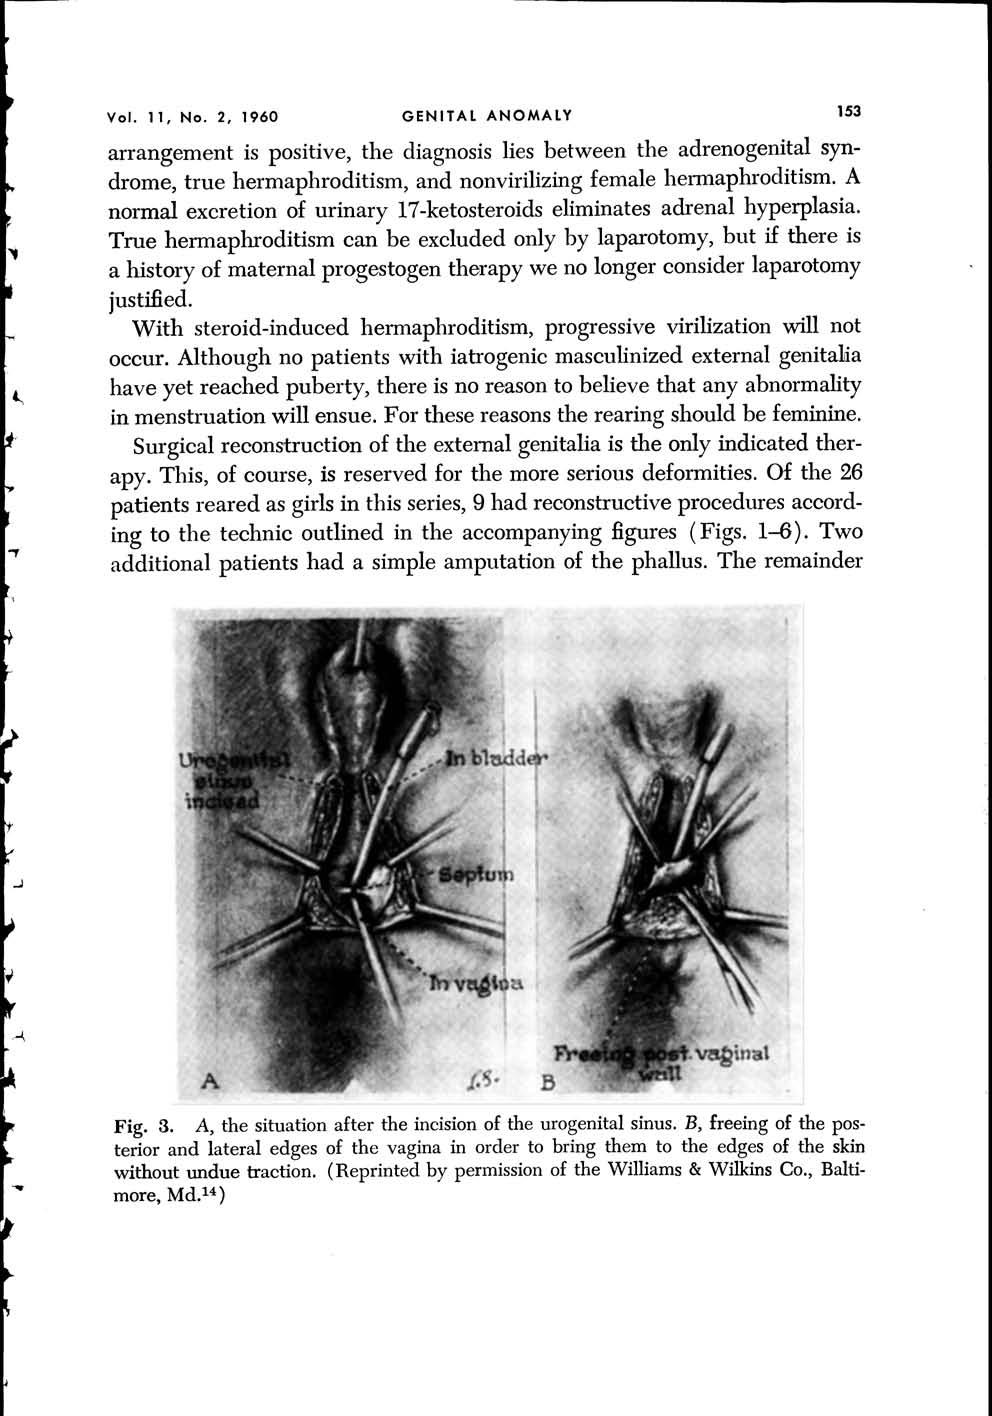 Vol. 11, No. 2, 1960 GENITAL ANOMALY 153 arrangement is positive, the diagnosis lies between the adrenogenital syndrome, true hermaphroditism, and nonvirilizing female hermaphroditism.